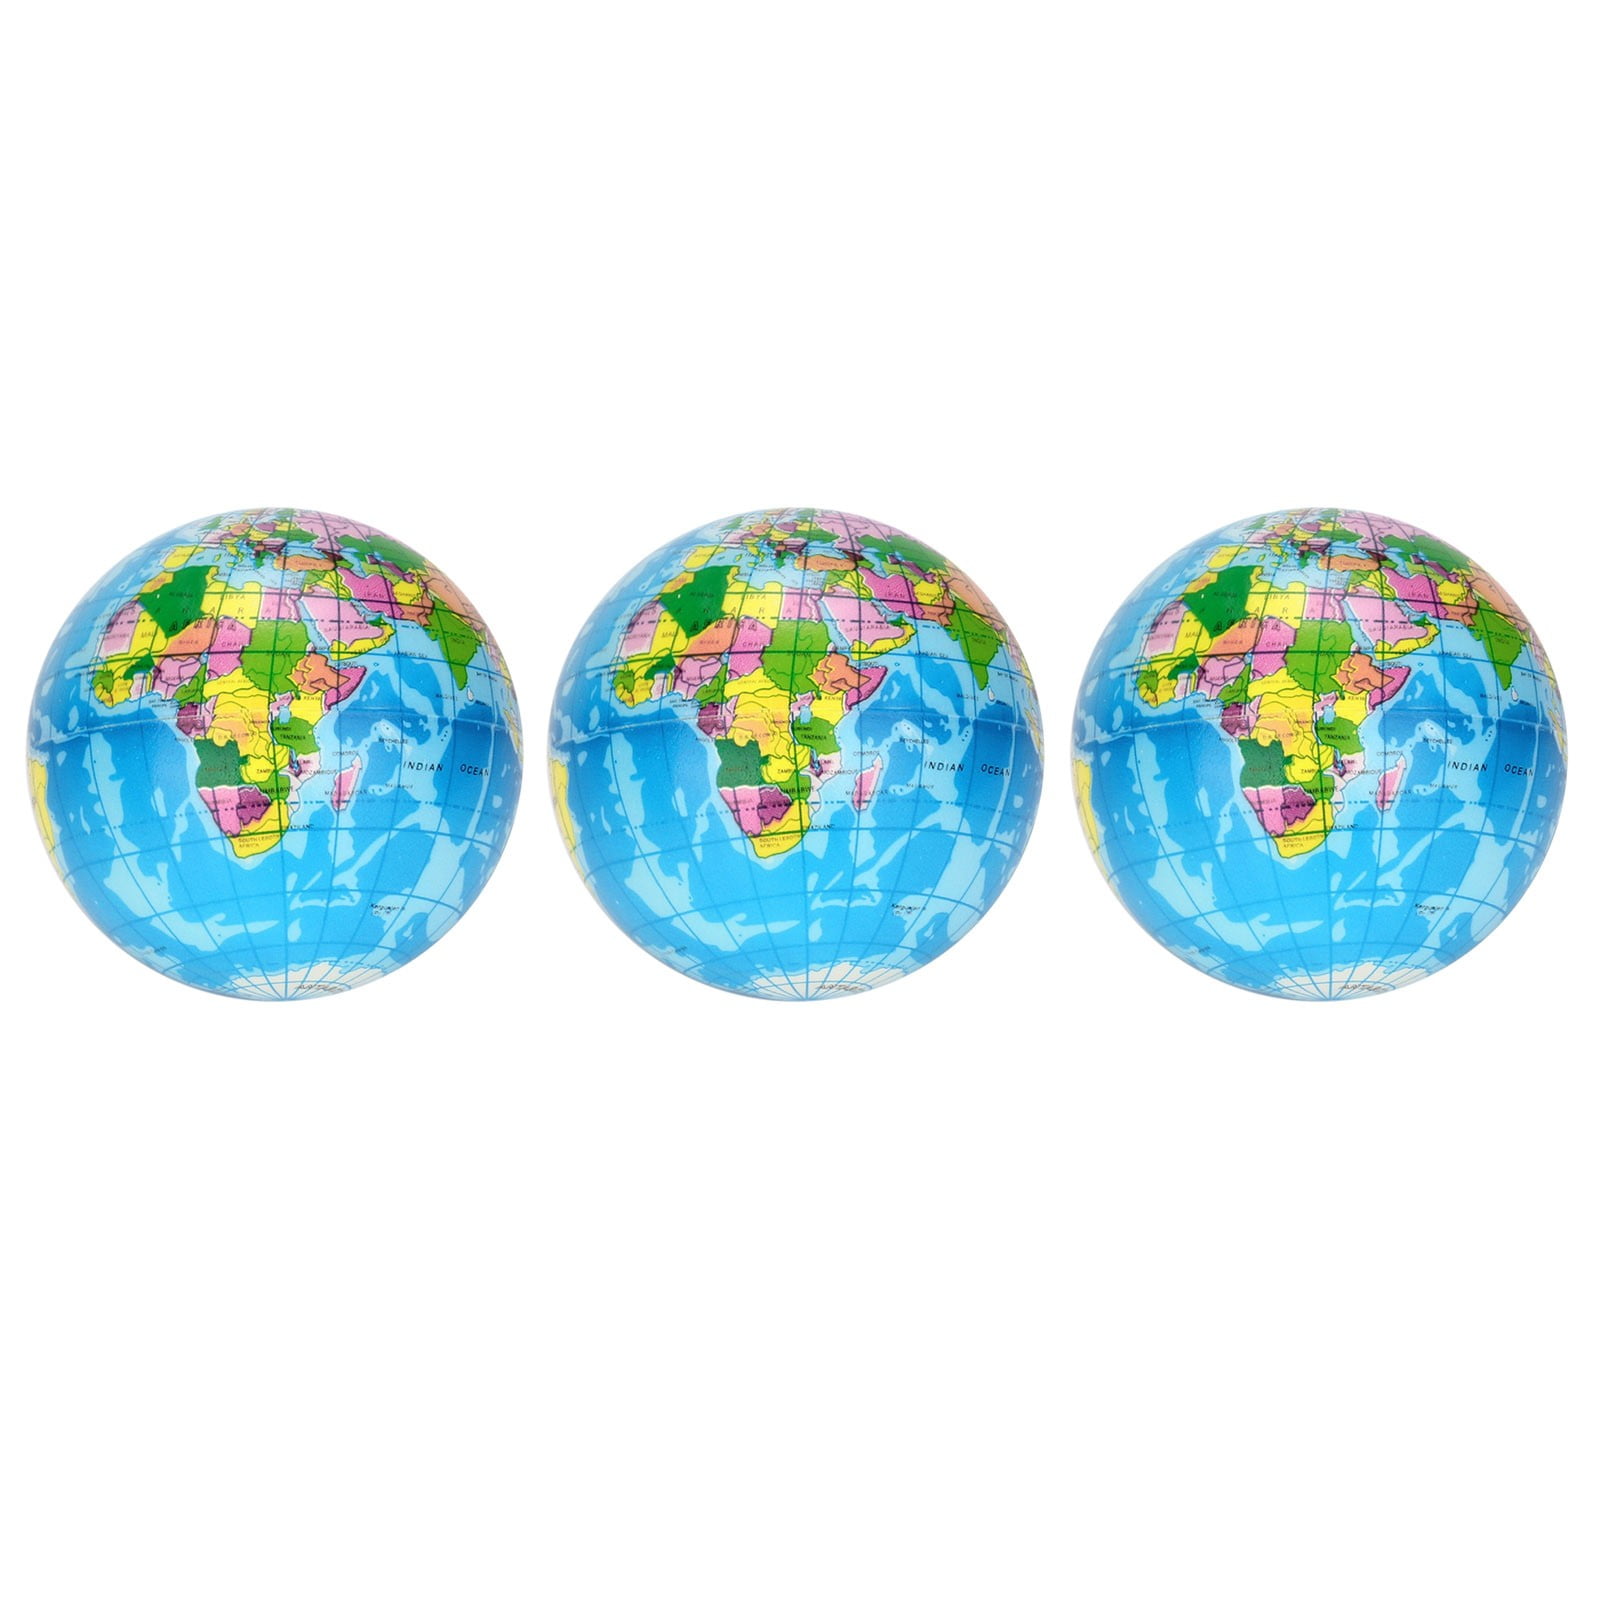 3" Globe Stress Ball Favor Party Gift Bag Fillers Prize Prizes World Bouncy 